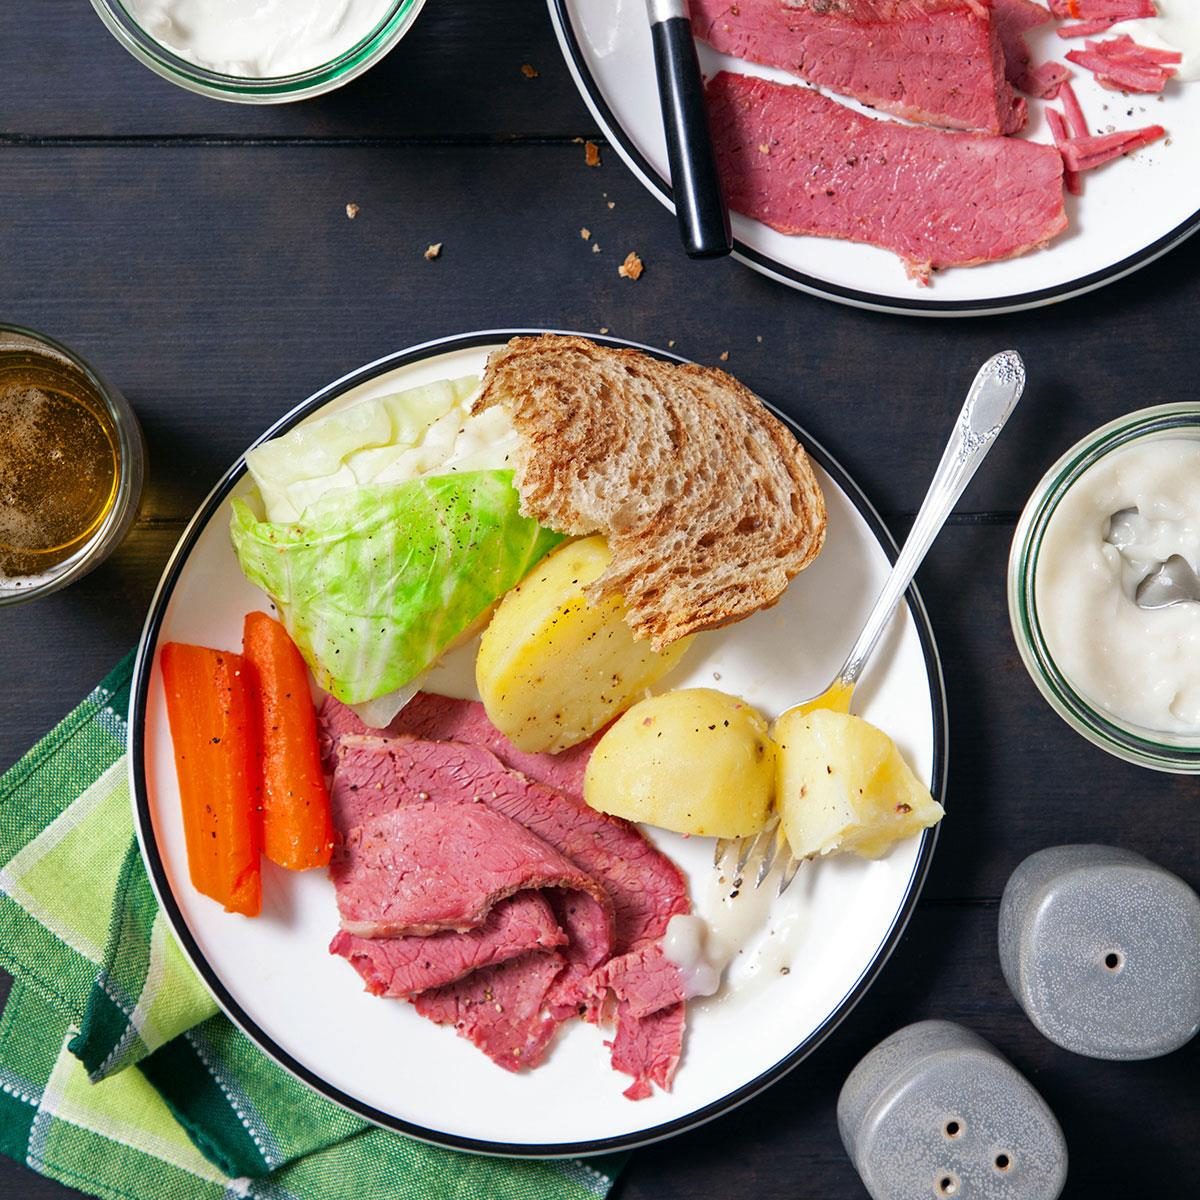 <p>It may be the most famous dish to eat on St. Patrick's Day, but this Irish-American corned beef recipe is a favorite at our table all year long. This is how to make corned beef and cabbage. —Evelyn Kenney, Trenton, New Jersey</p> <div class="listicle-page__buttons"> <div class="listicle-page__cta-button"><a href='https://www.tasteofhome.com/recipes/favorite-corned-beef-and-cabbage/'>Go to Recipe</a></div> </div>